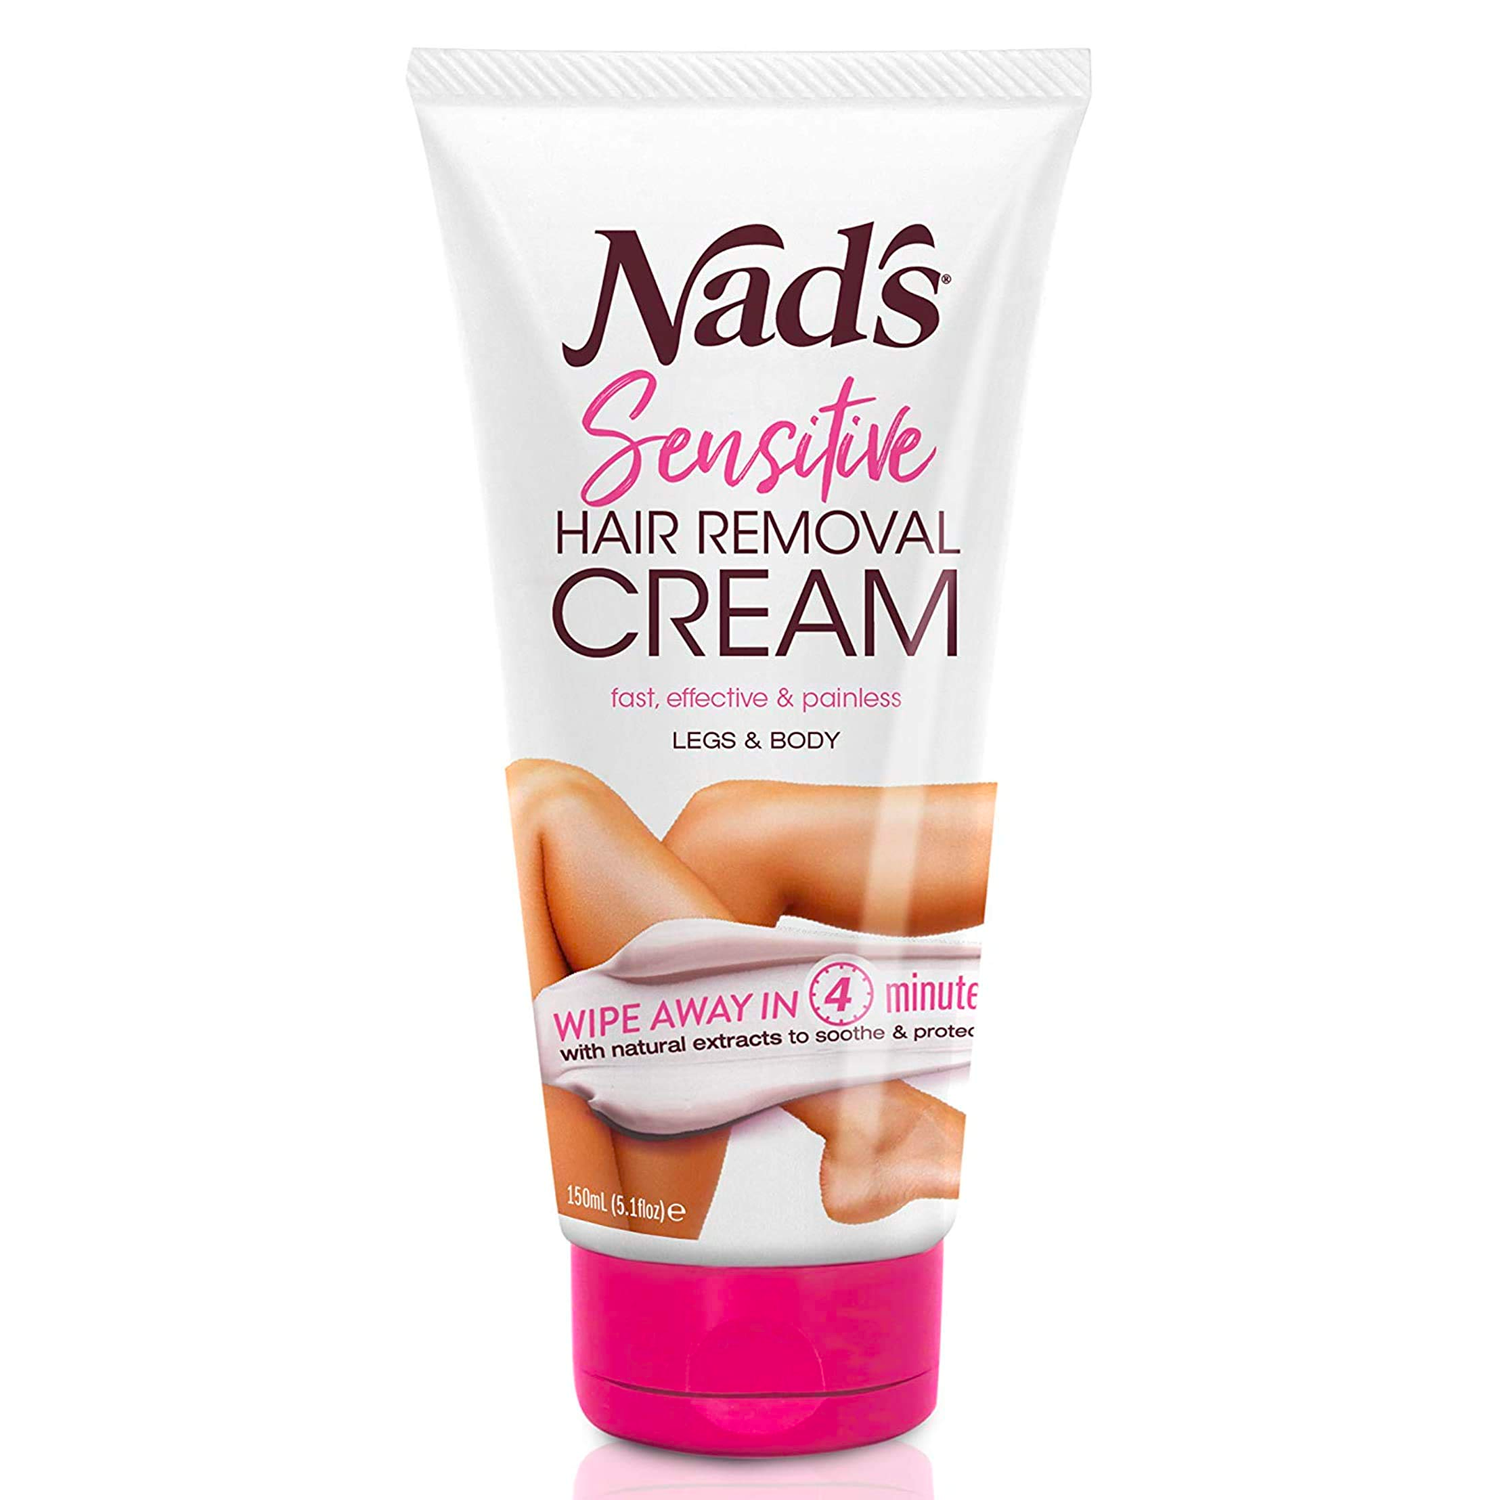 15 Best Hair Removal Creams That Won't Burn Skin for 2023